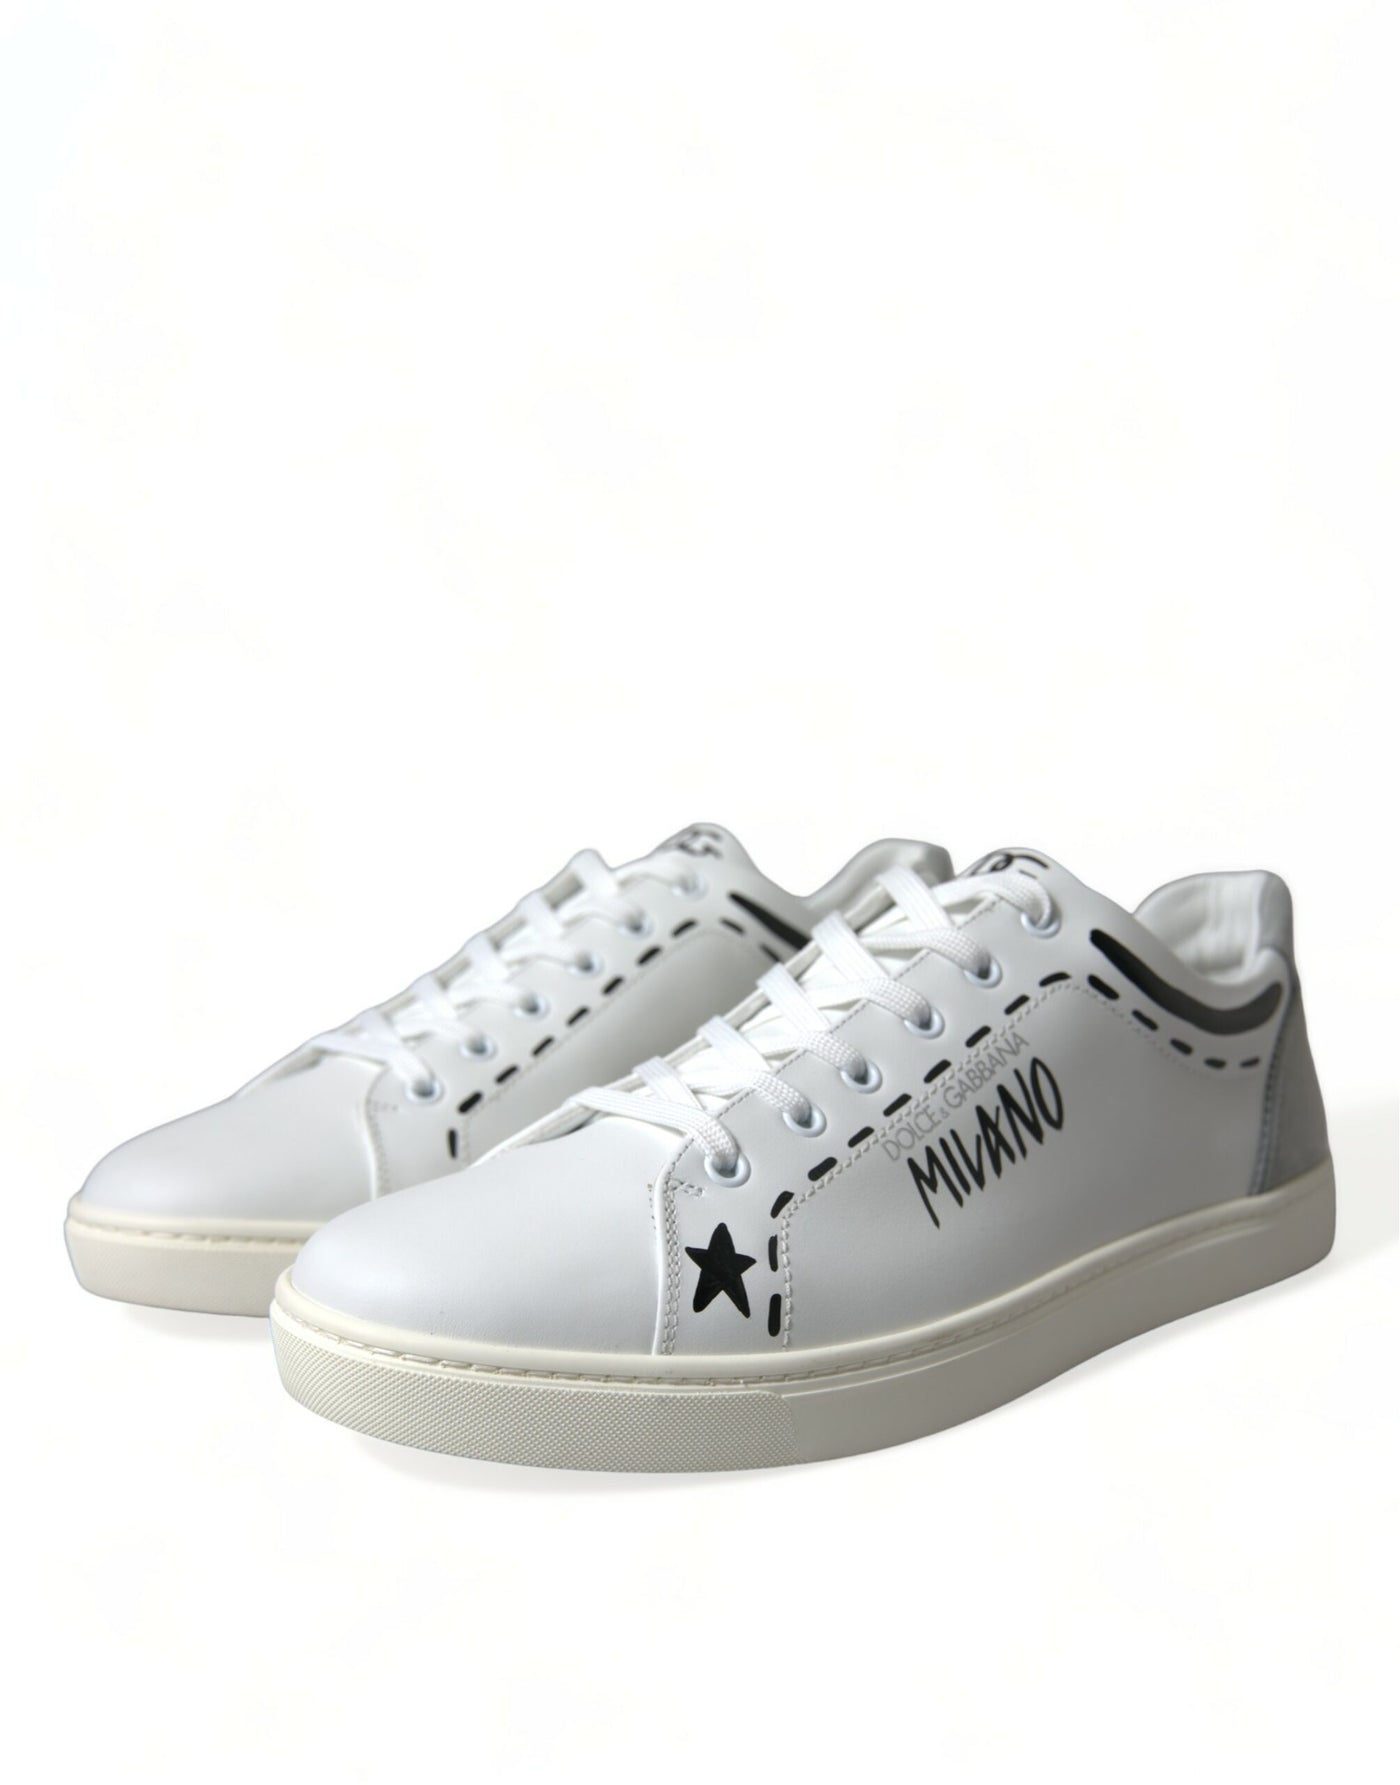 Dolce & Gabbana White Gray Leather LOVE Milano Sneakers Shoes